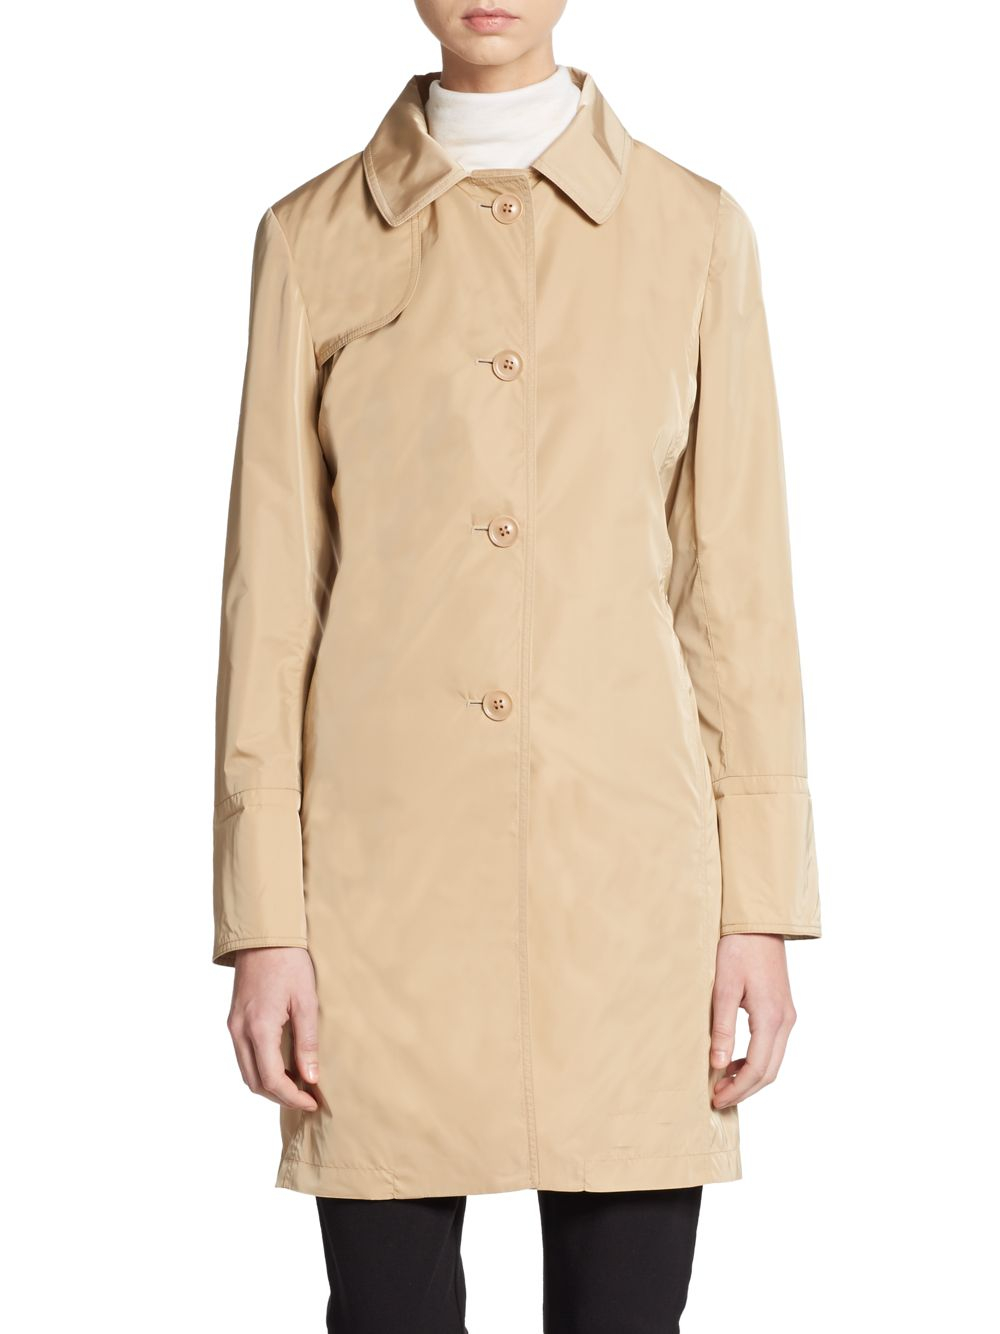 Cinzia rocca Button-front Nylon Trench Coat in Natural | Lyst